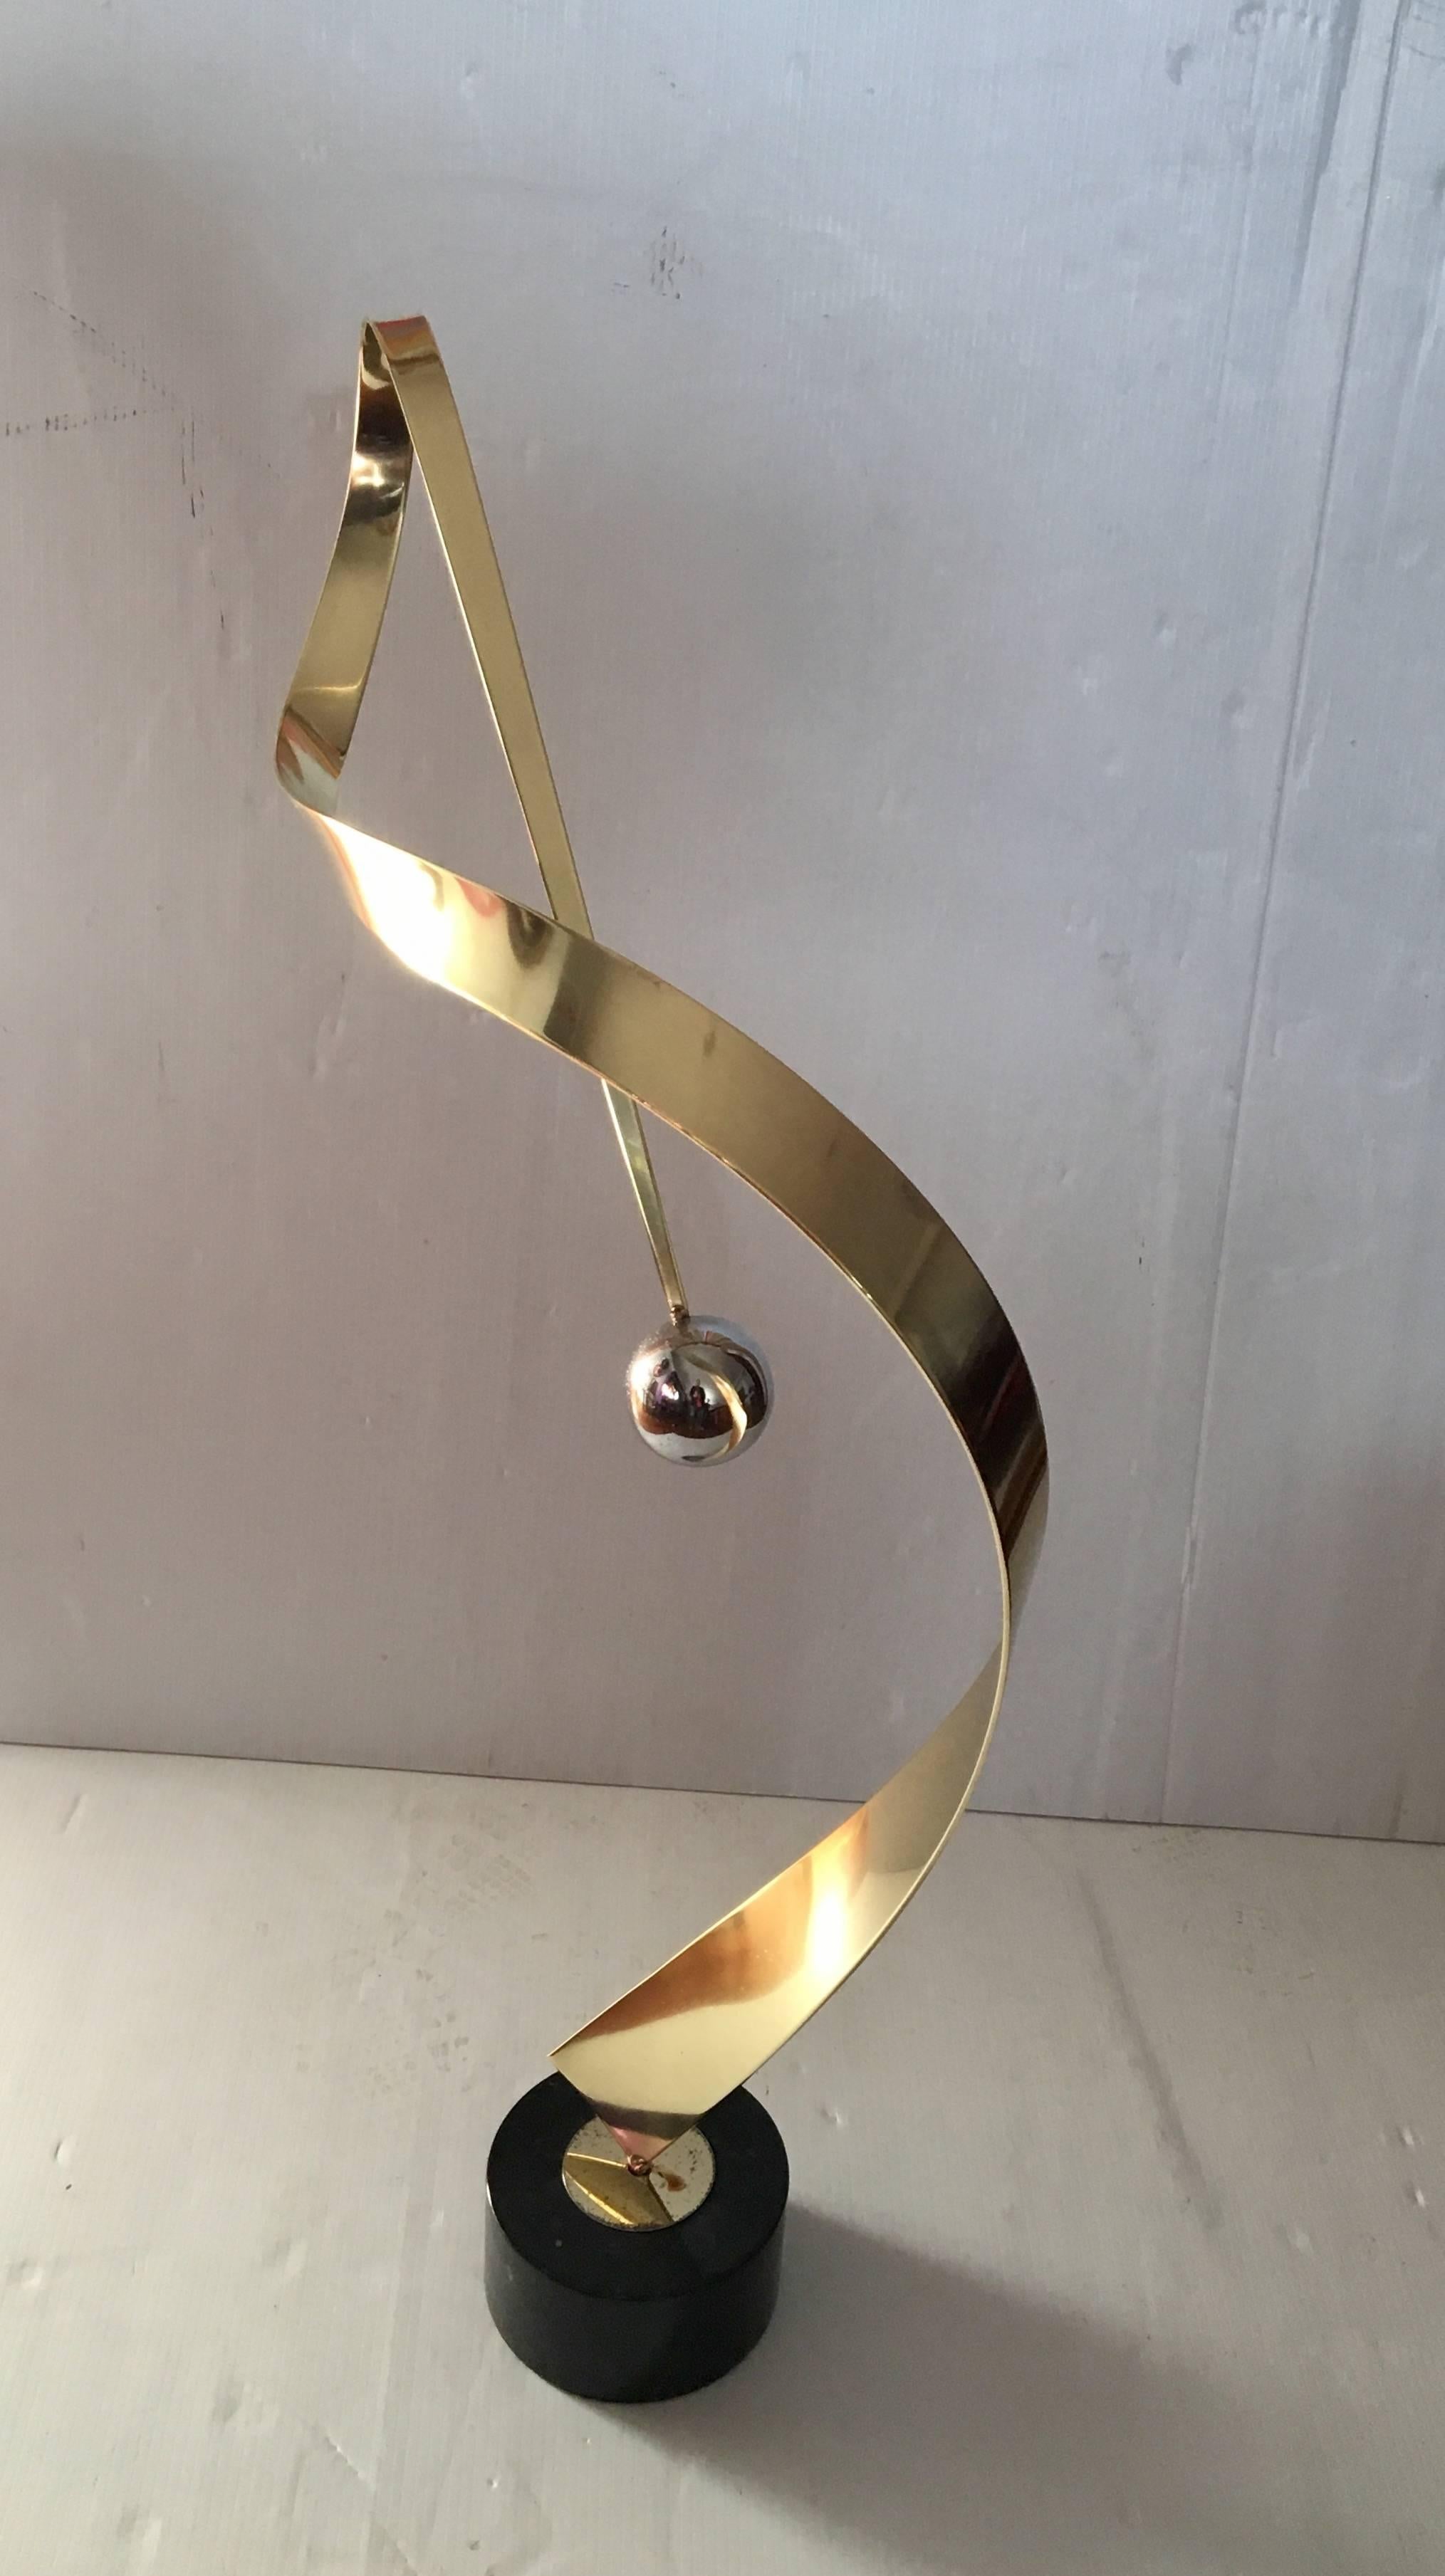 Beautiful abstract tall sculpture by Curtis Jere , Polished brass with a solid chrome ball sitting on a black marble base , the sculpture has been polished the brass ring on the bottom shows some wear due to age , its a great piece that will